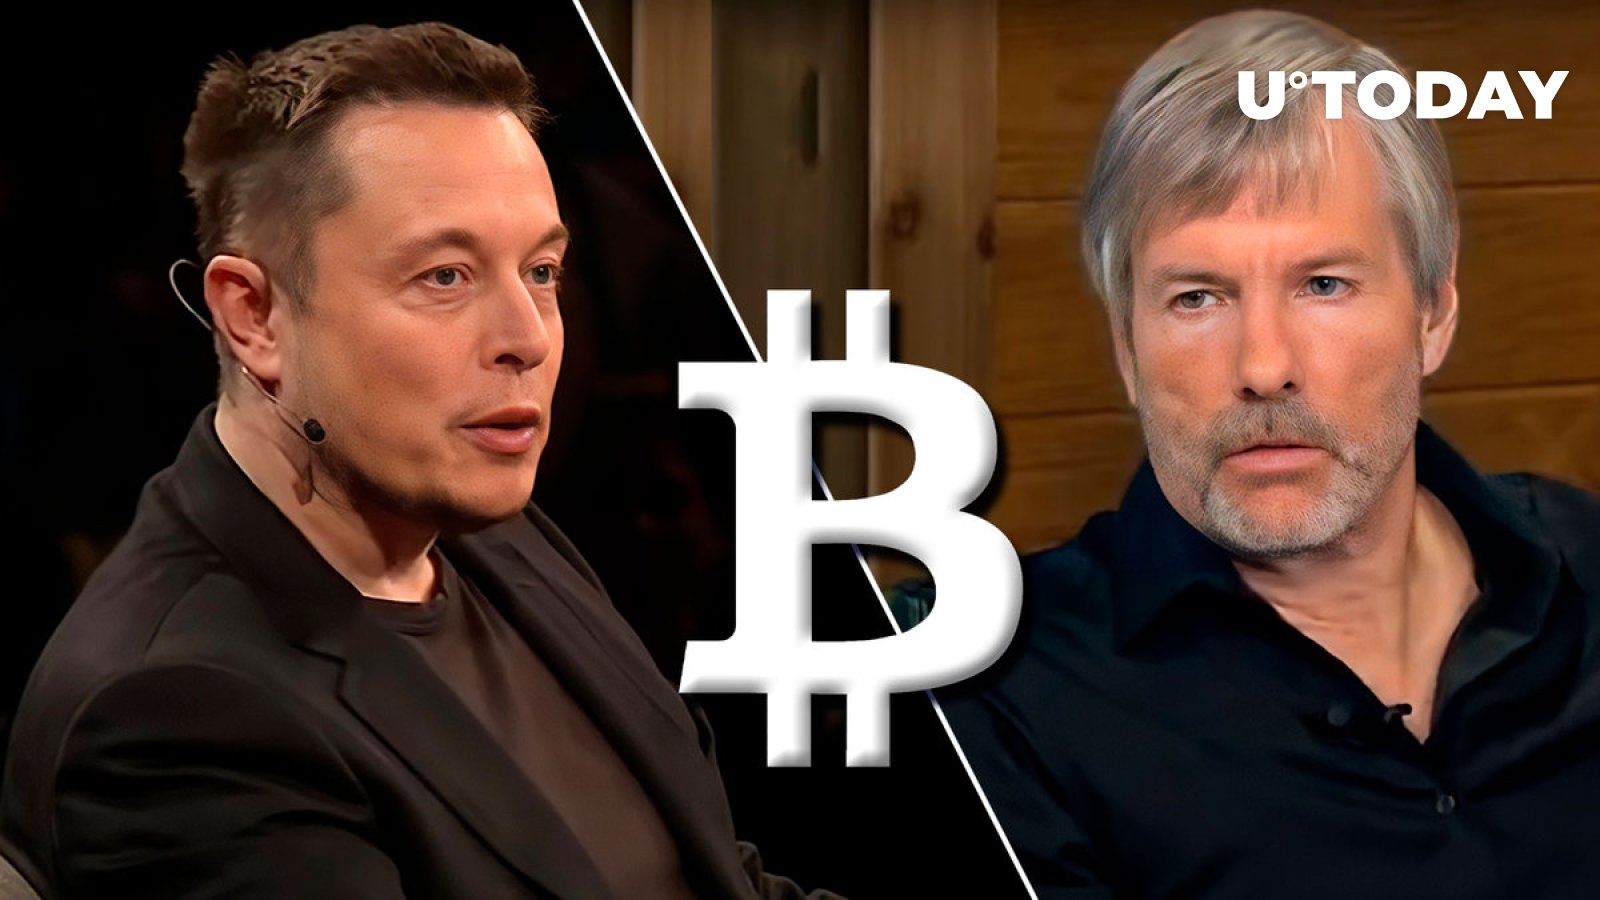 Michael Saylor Urges Elon Musk to Buy Some More Bitcoin